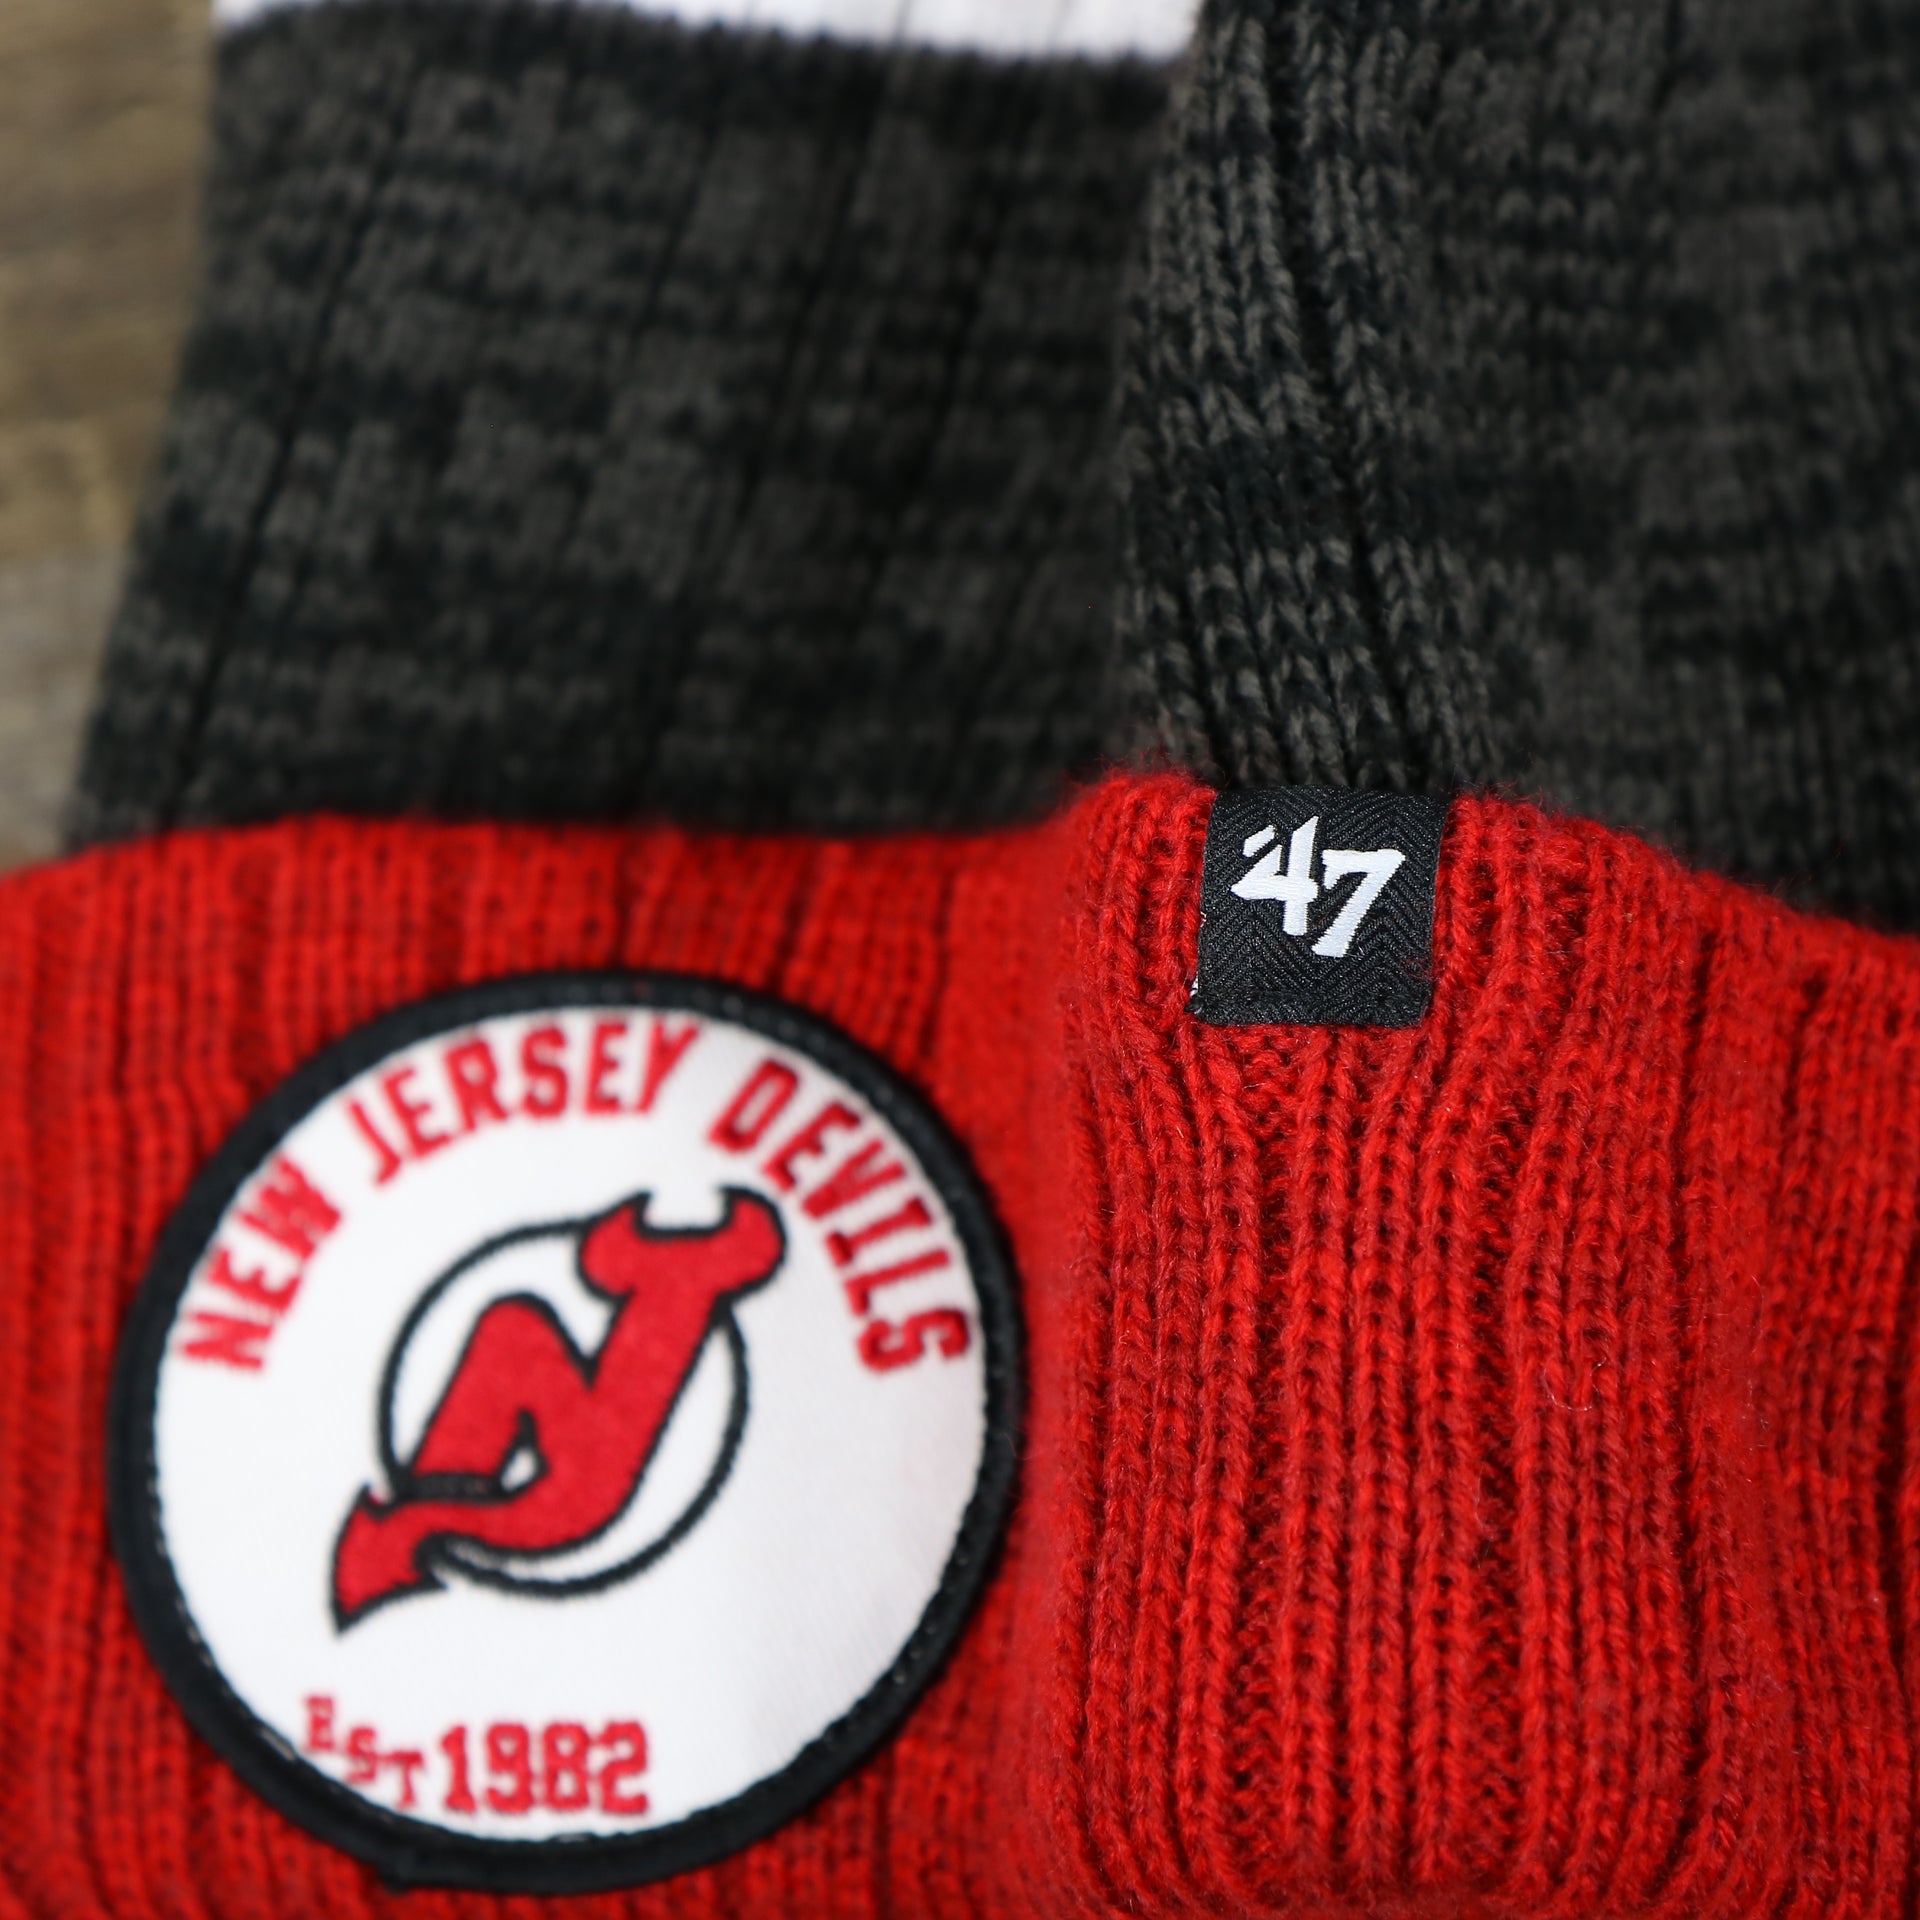 The 47 Brand Tag on the New Jersey Devils Cuffed Logo Striped Winter Beanie With Pom Pom | Red and Gray Winter Beanie